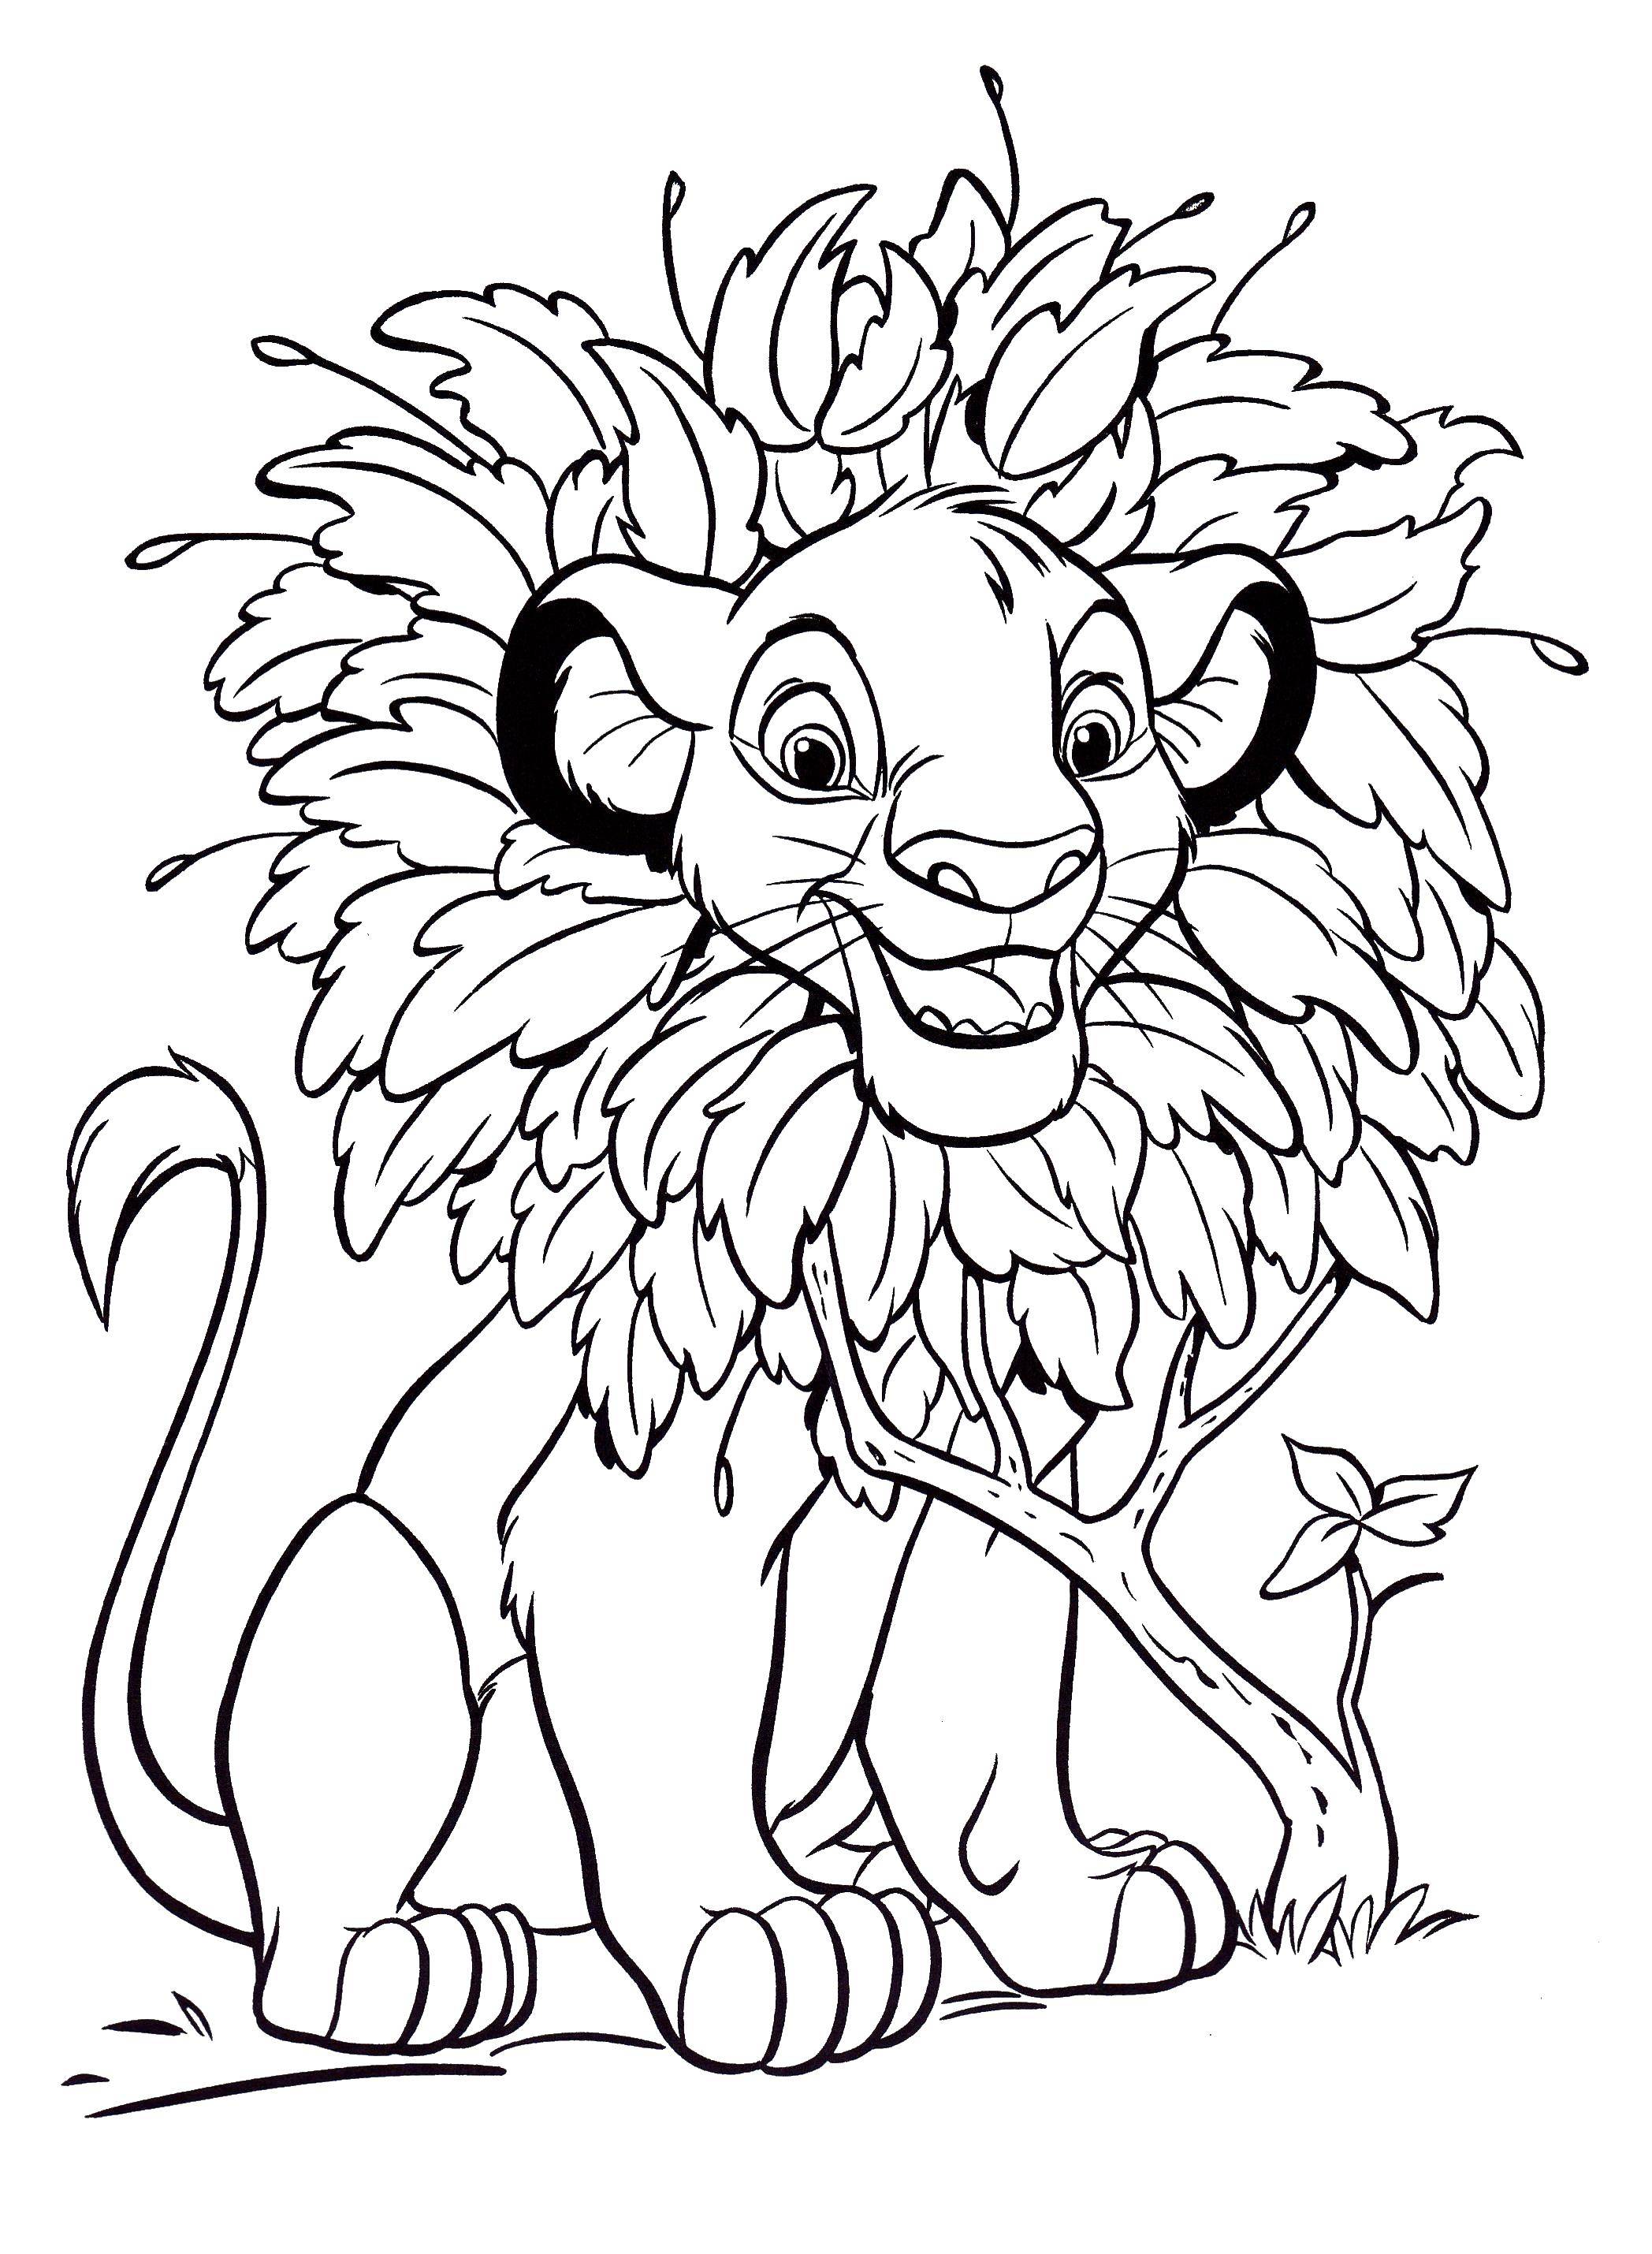 Coloring Lion with mane Il leaves. Category Disney coloring pages. Tags:  The lion king, cartoons.